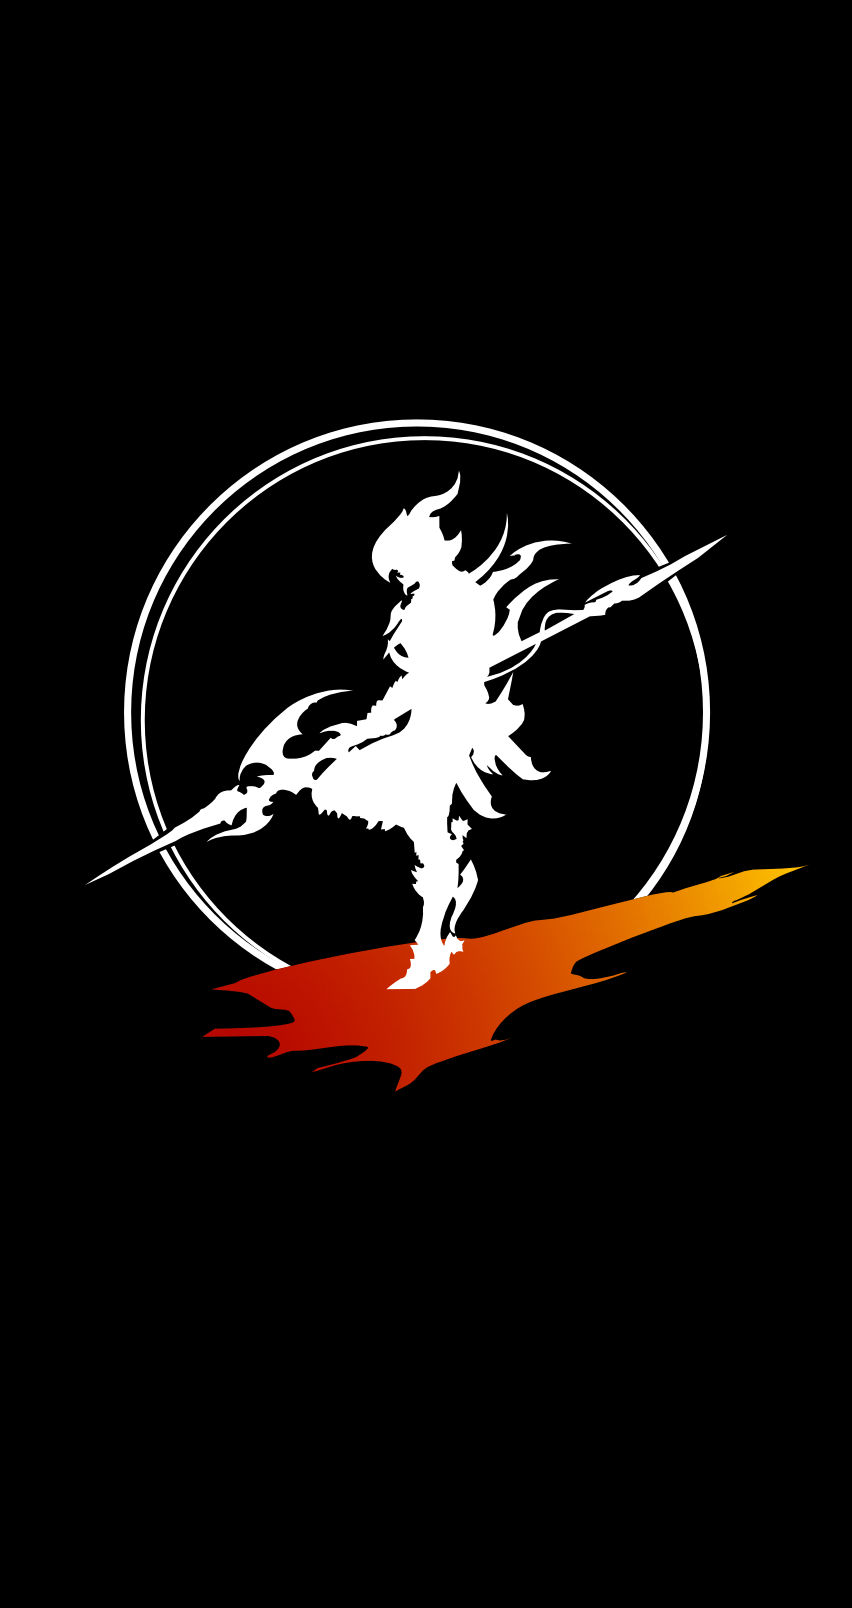 Made this dragoon wallpaper for my phone while I was bored at work